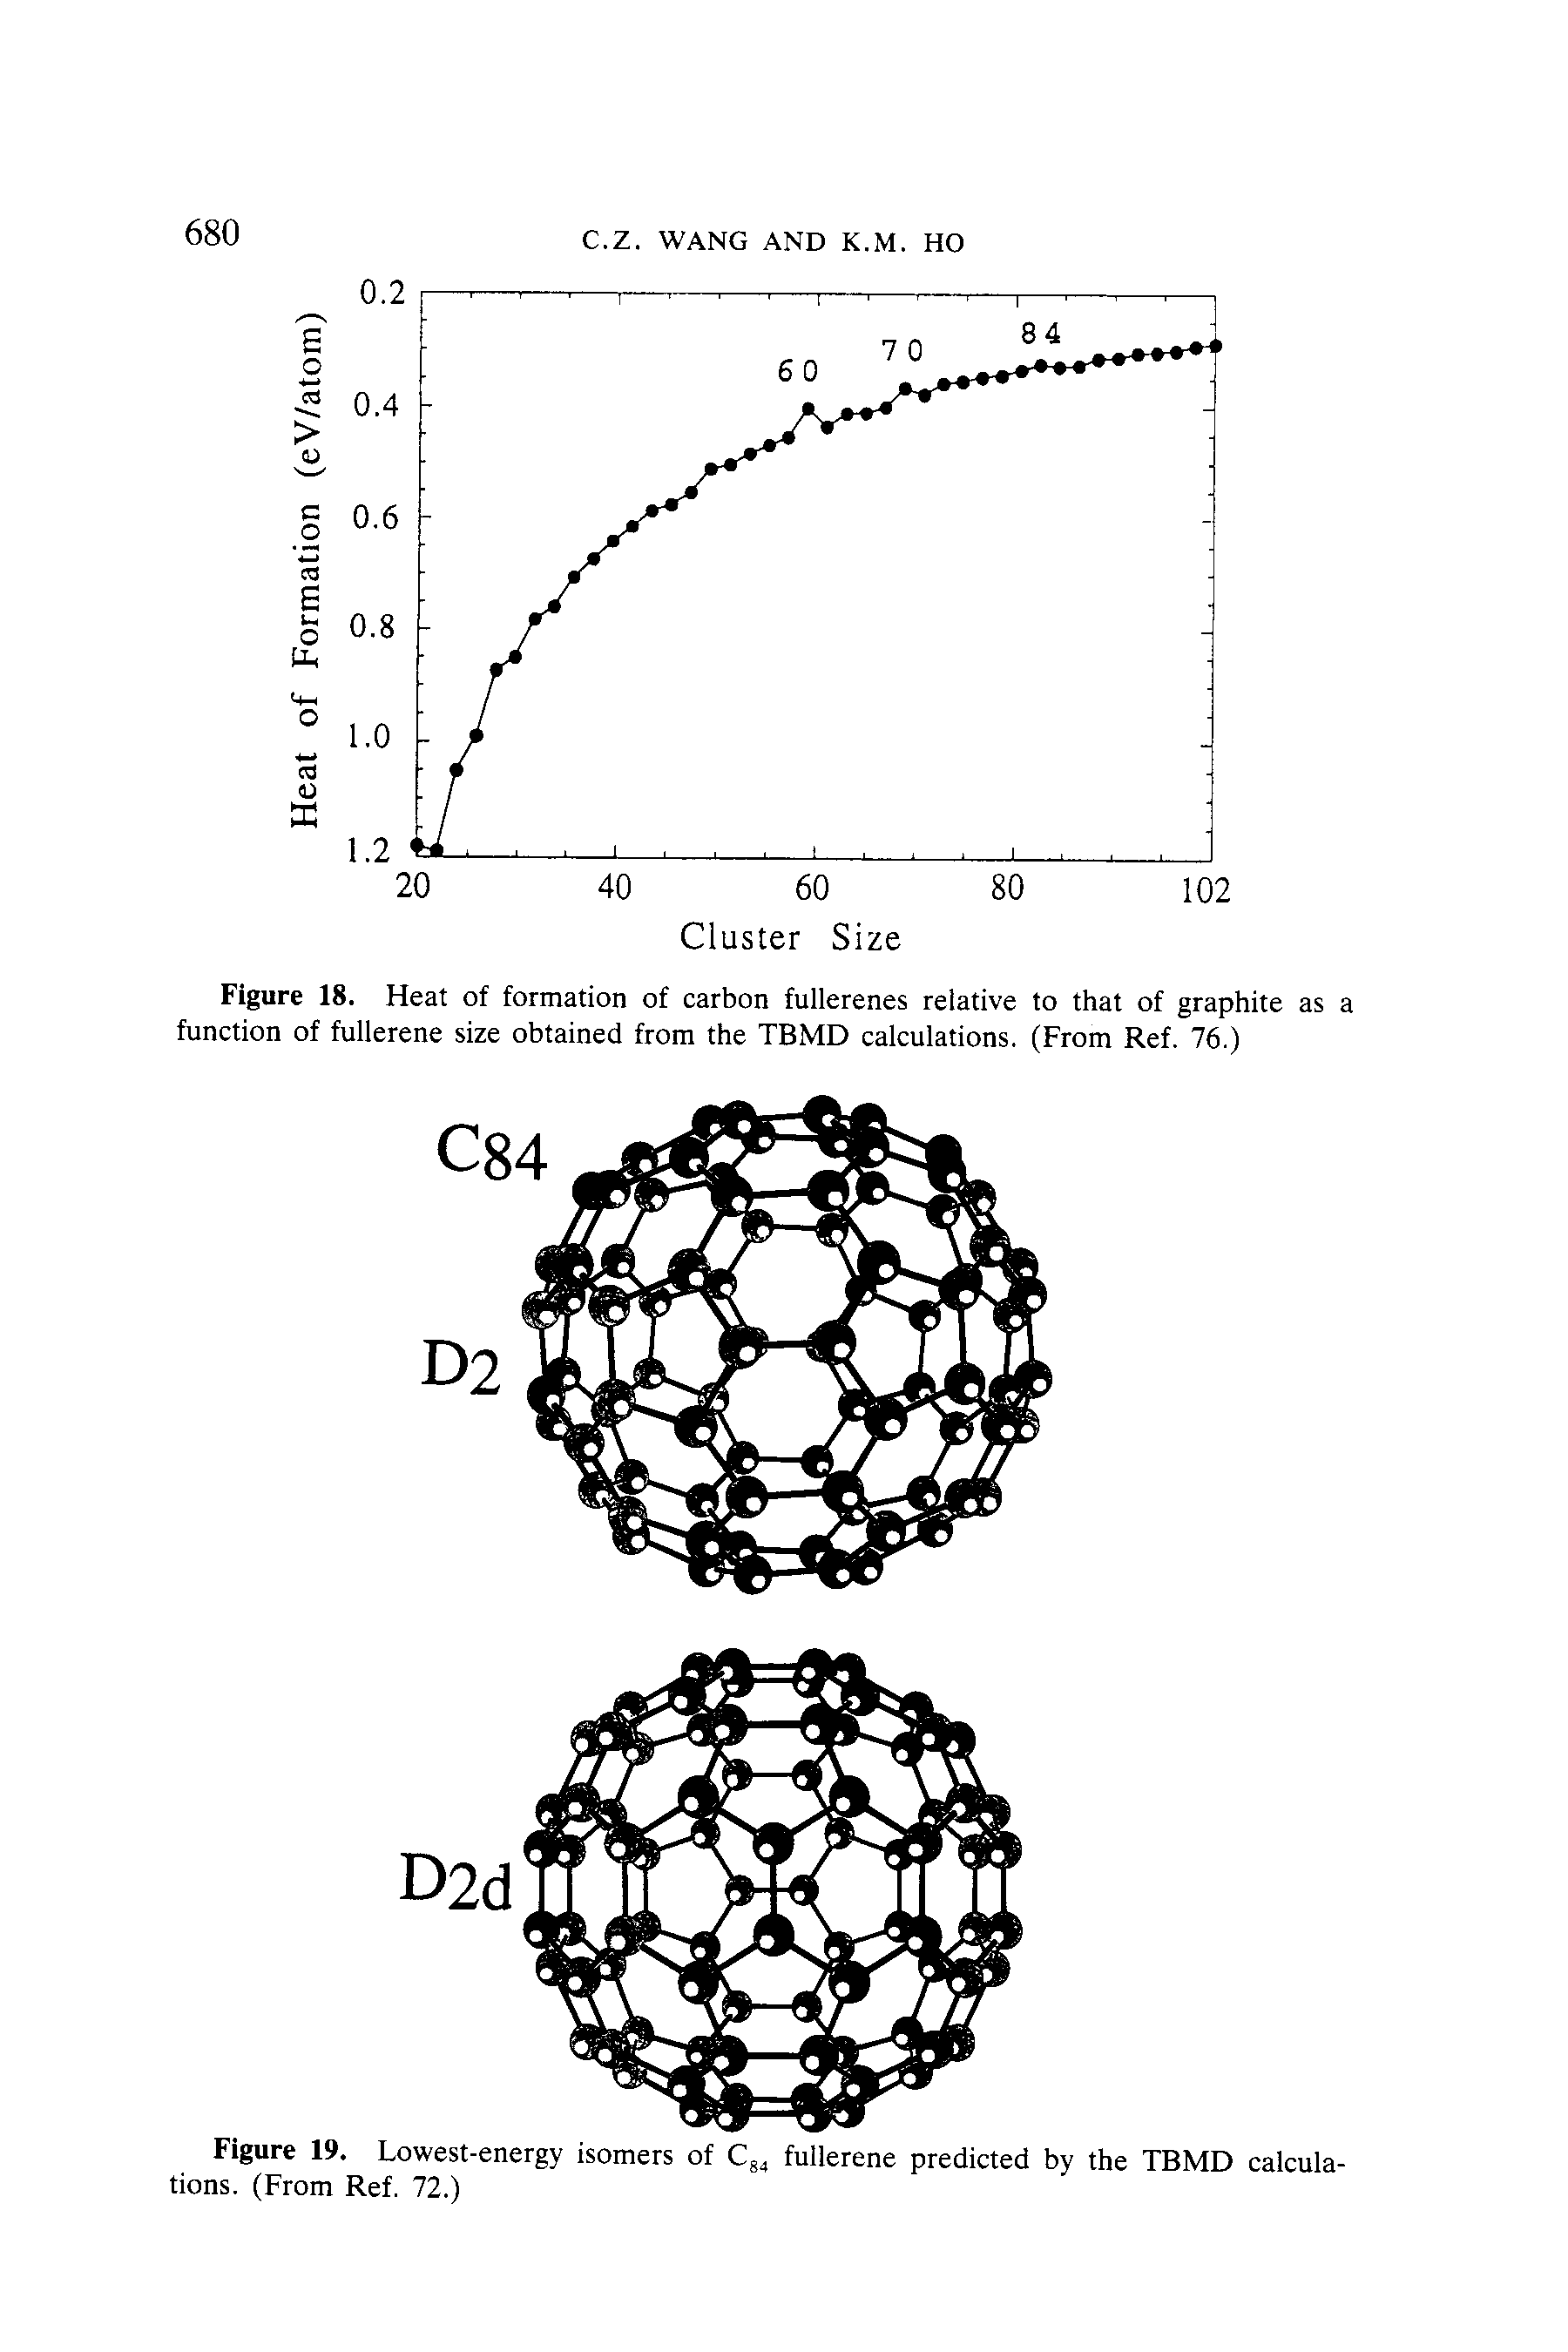 Figure 18. Heat of formation of carbon fullerenes relative to that of graphite as a function of fullerene size obtained from the TBMD calculations. (From Ref. 76.)...